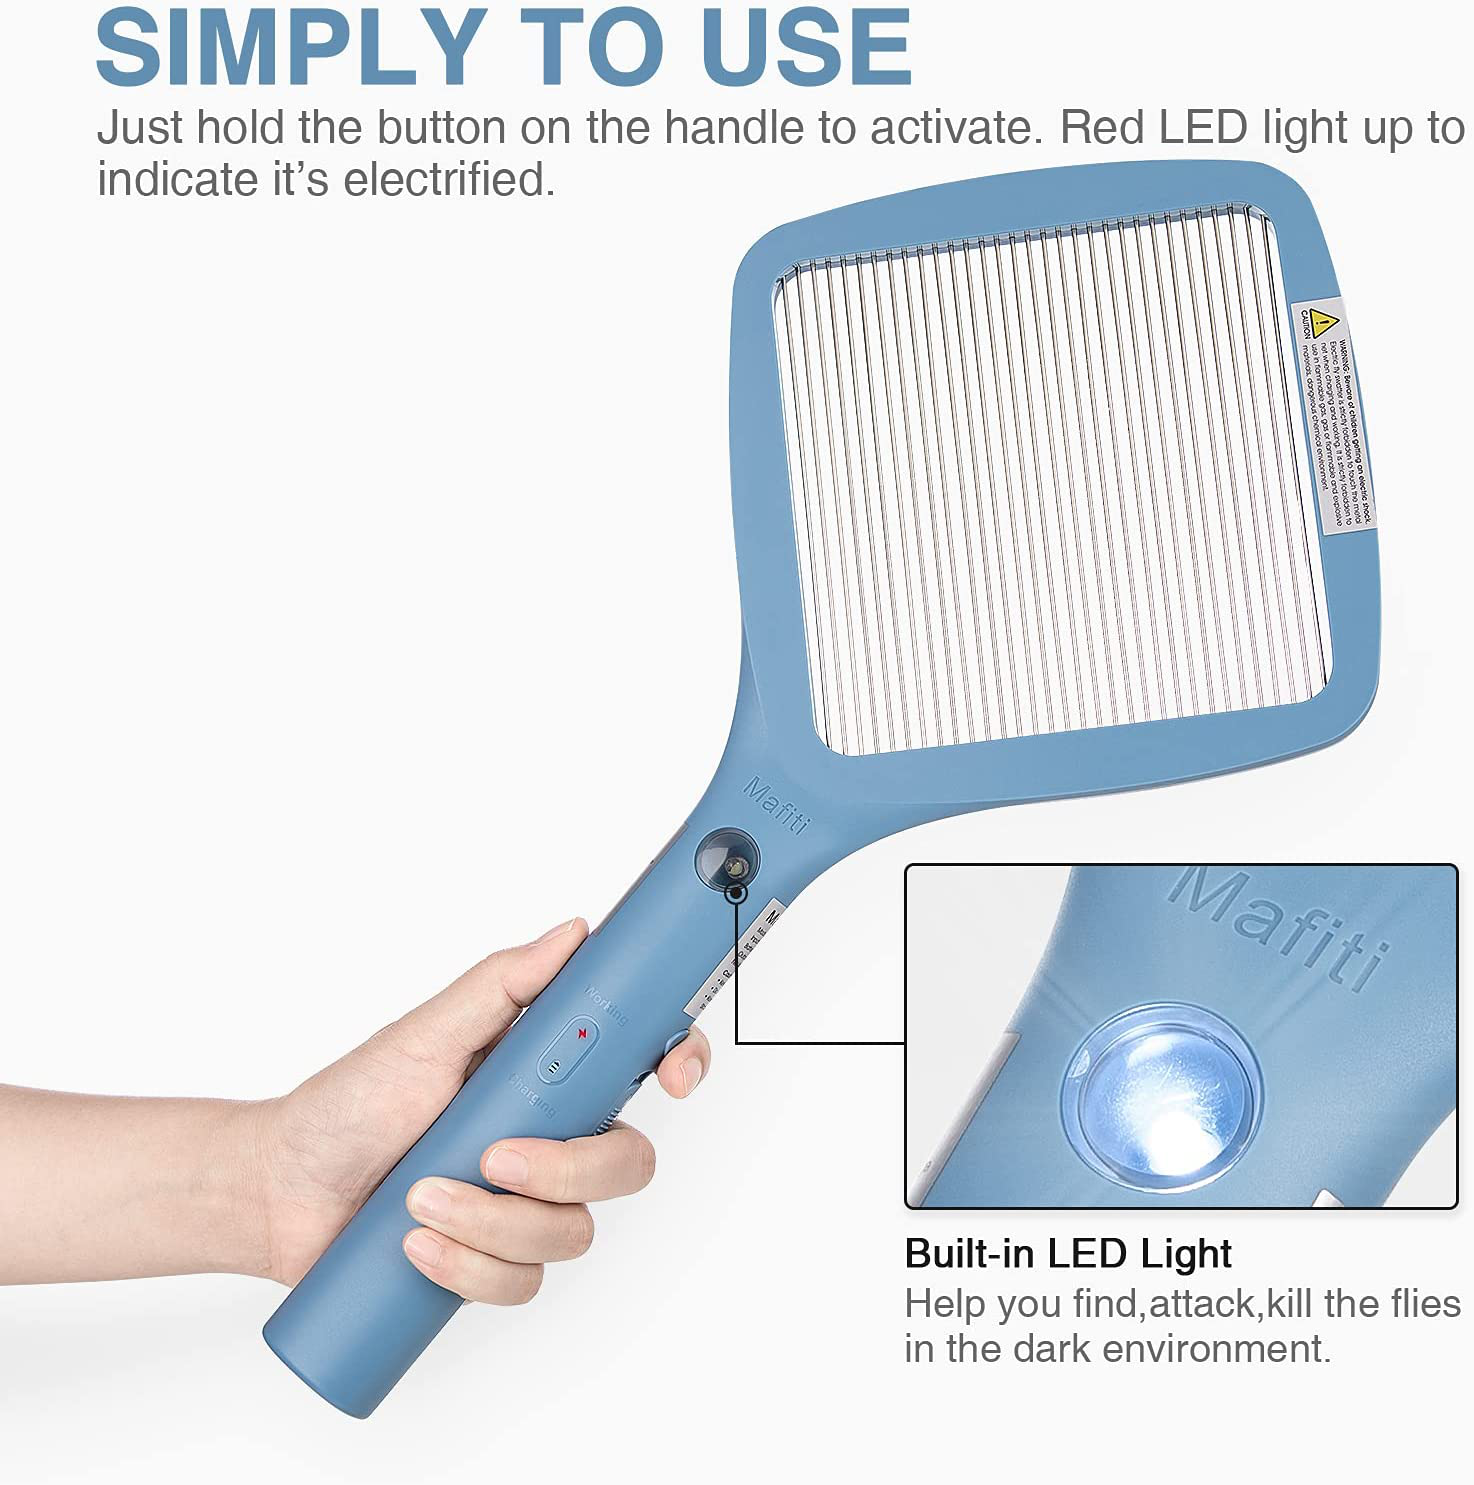 mafiti Electric Fly Swatter, Mosquito Zapper, Bug Zapper Racket Fly Killer Indoor Outdoor, Rechargeable, Light, Pest Control, Camping Accessories (White)